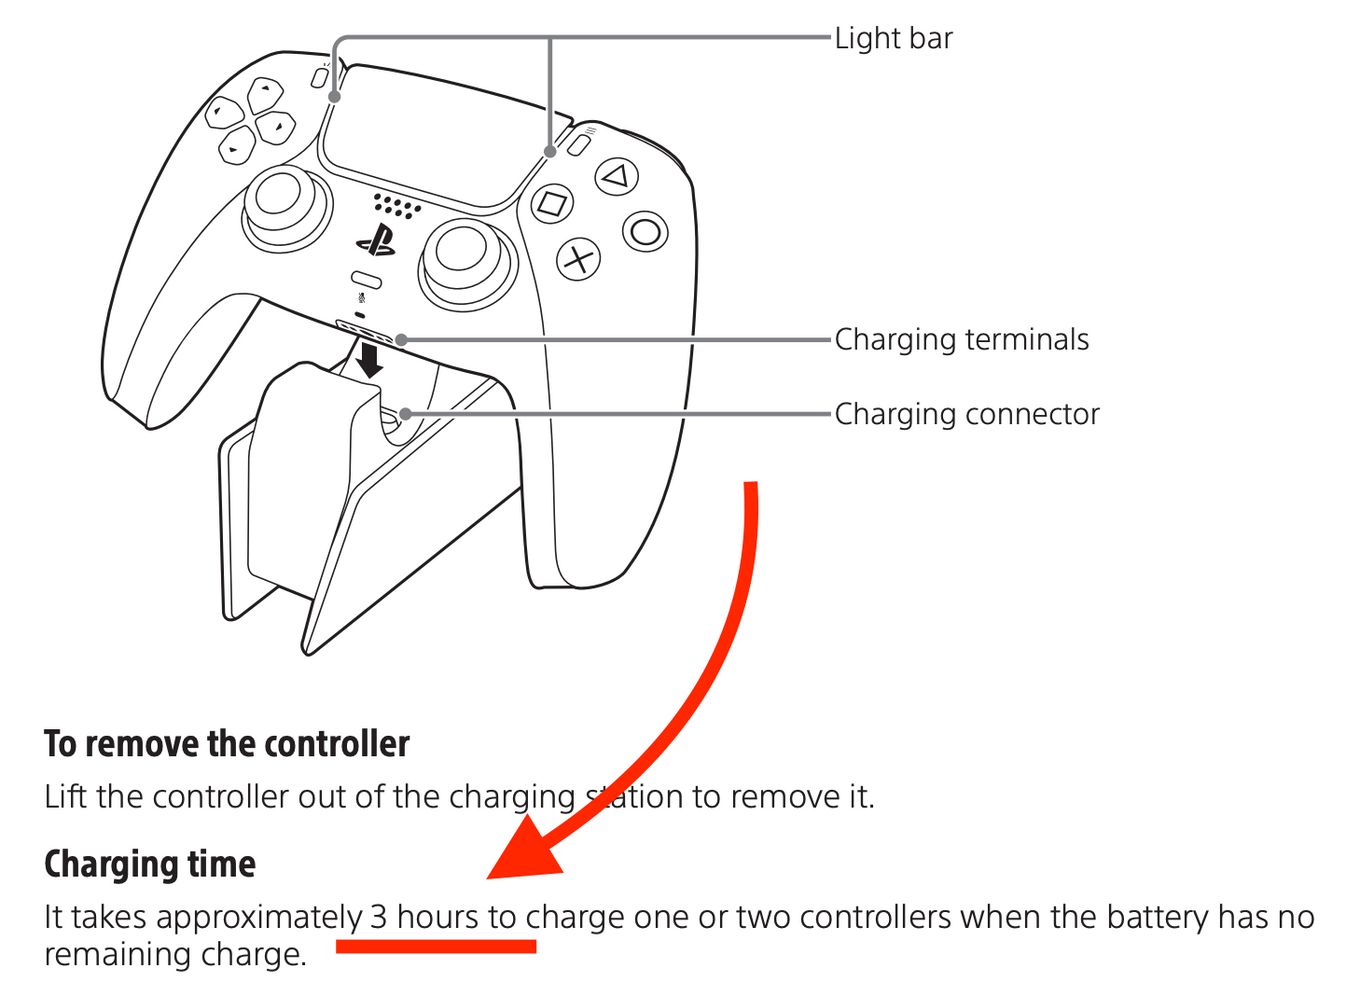 Sony Documentation on DualSense - It takes 3 hours to charge on or two controllers